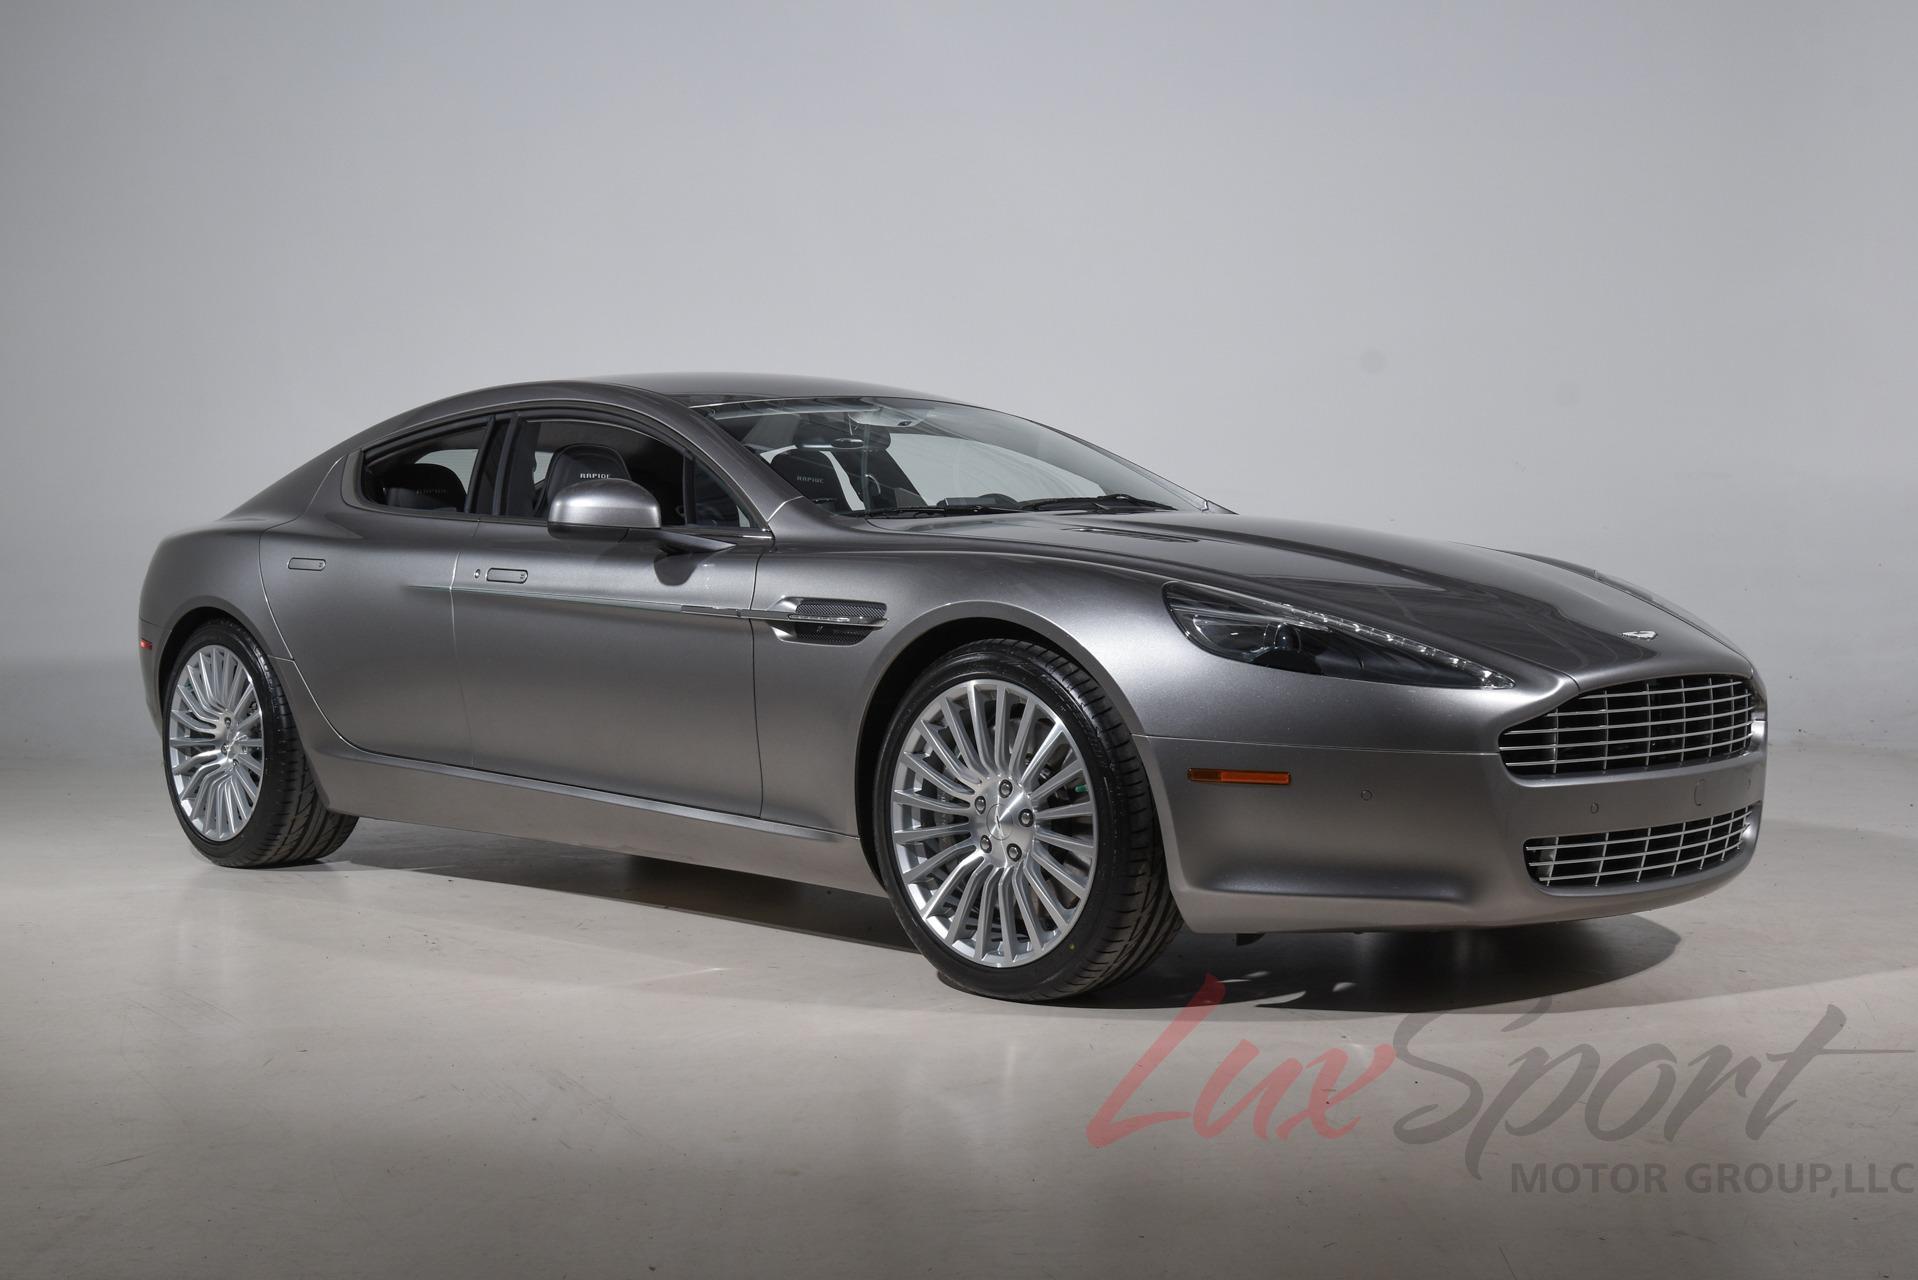 Used 2011 Aston Martin Rapide Luxe | Plainview, NY